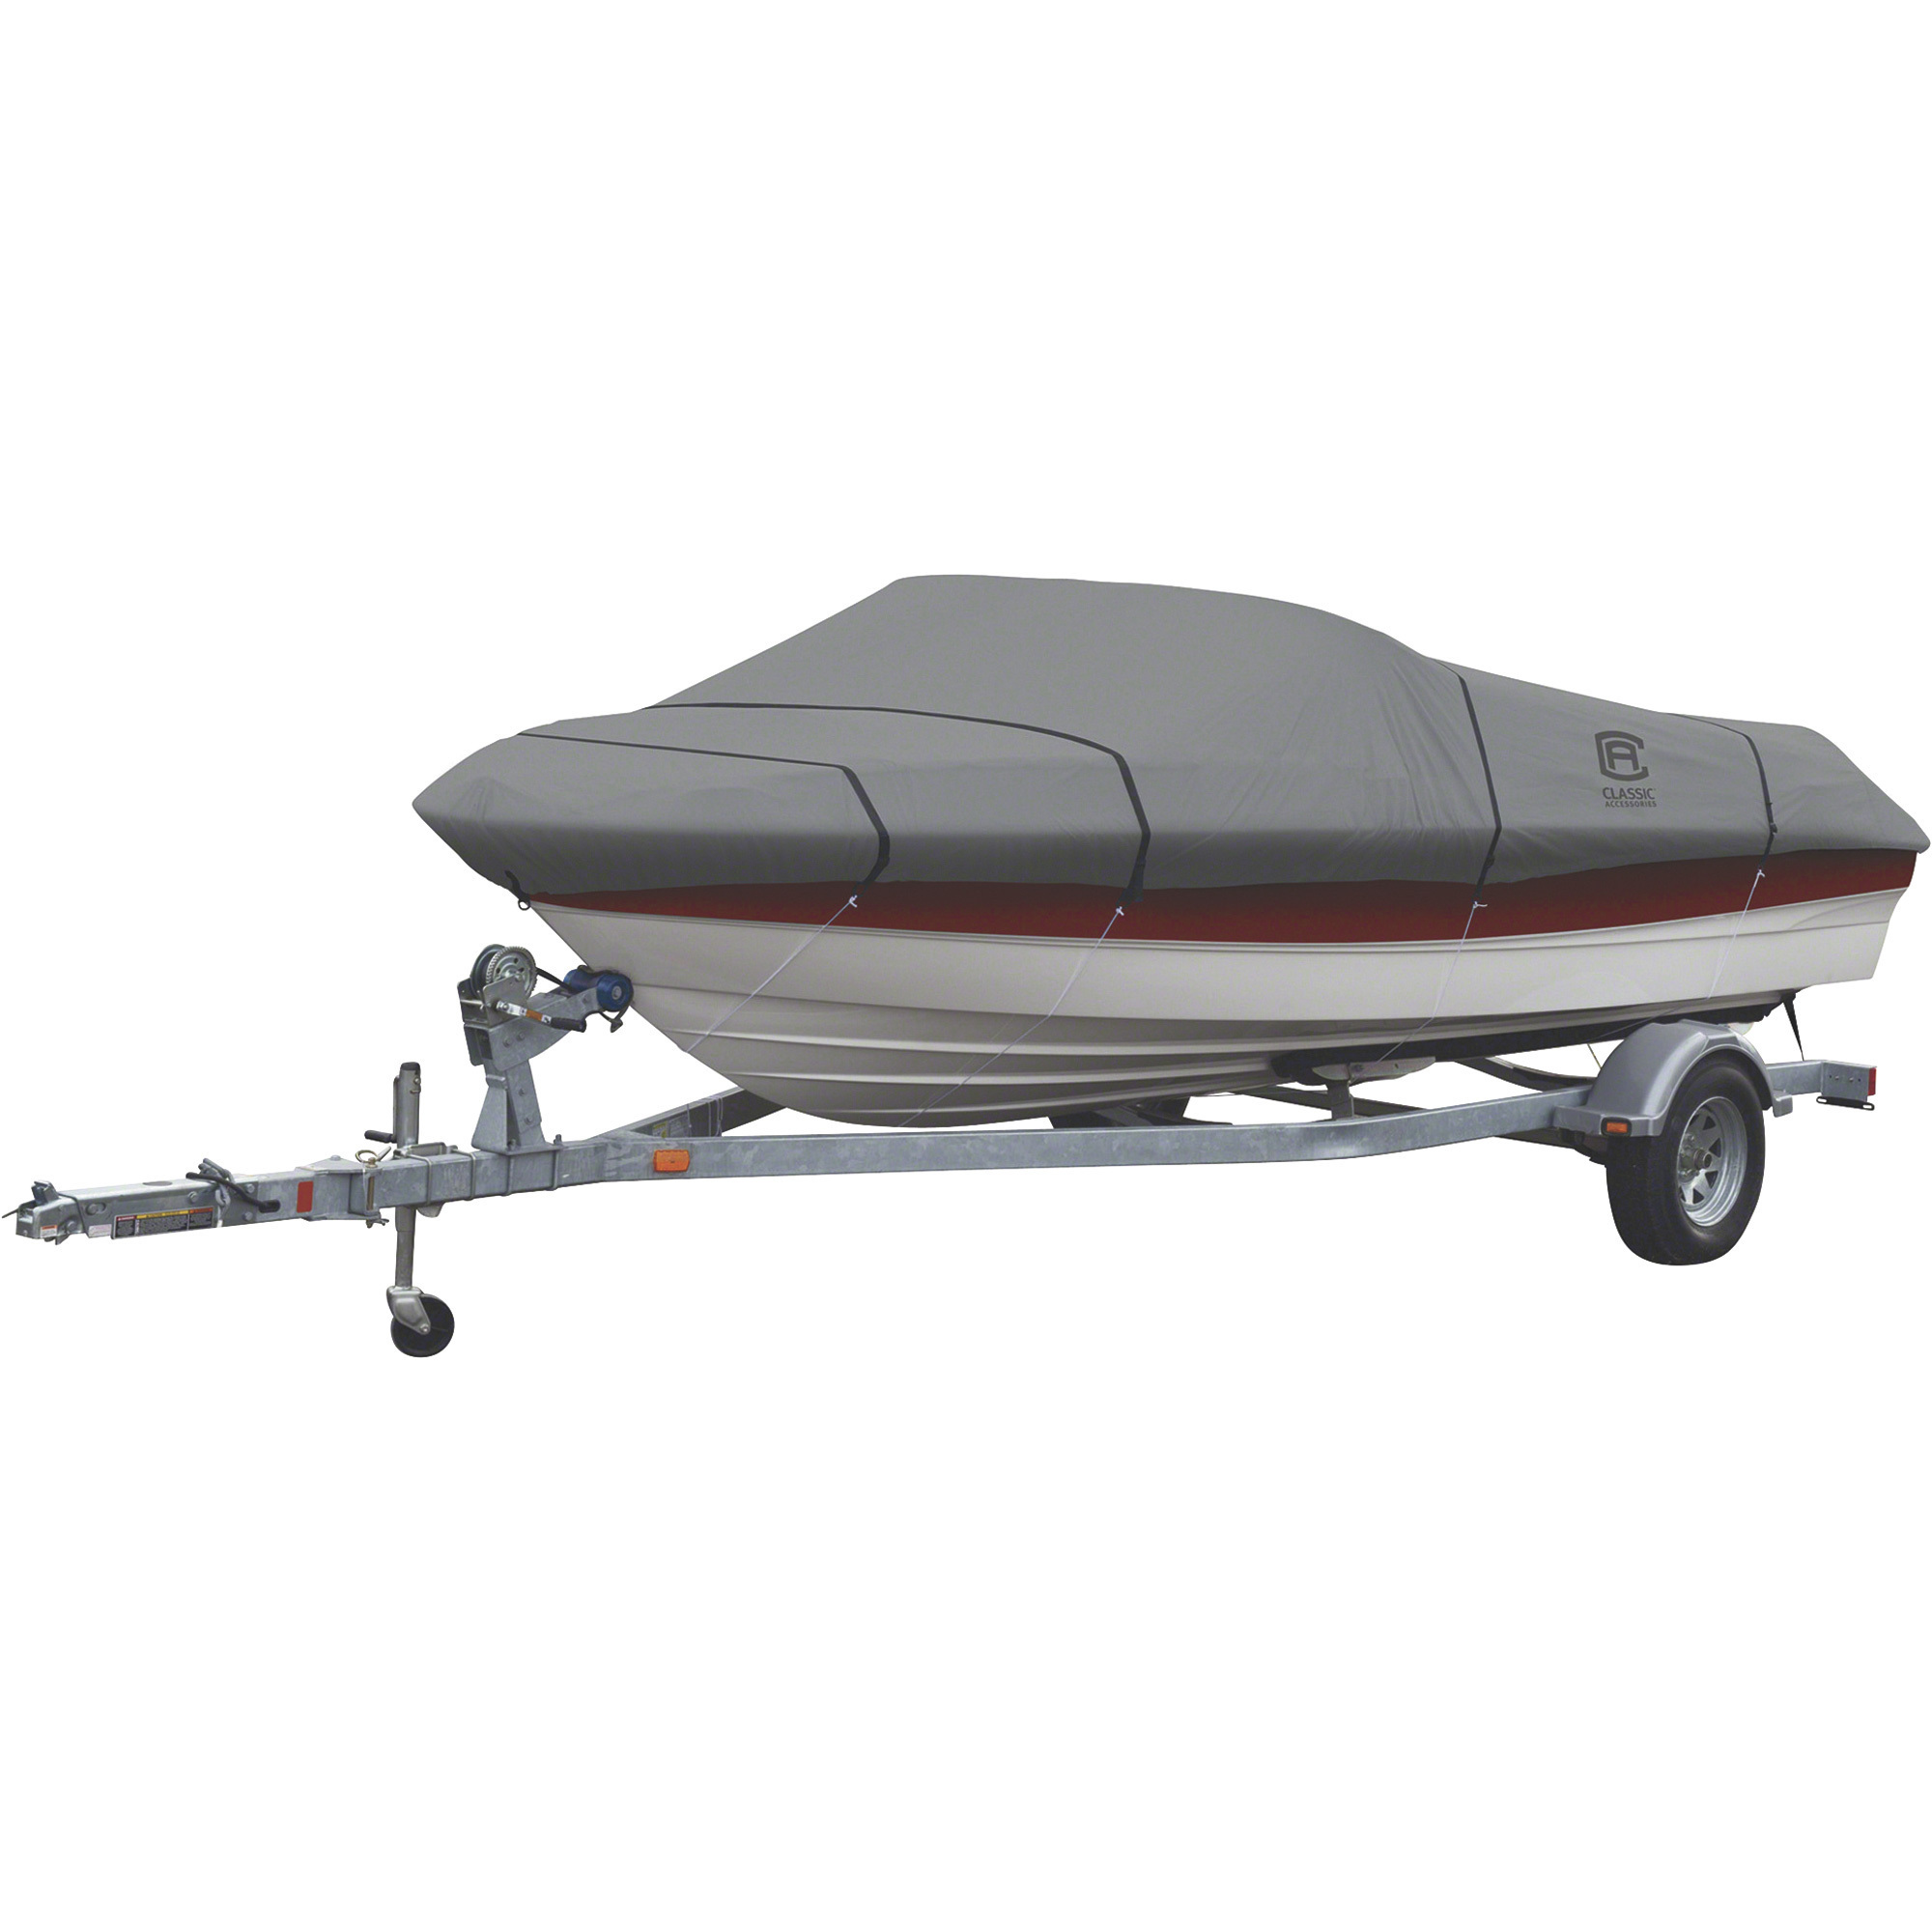 Classic Accessories Lunex RS-1 Trailerable Boat Cover, Fits 16ft.-18 1/2ft.  Fishing Boats, Ski Boats and Pro-Style Bass Boats (Beam Width up to 98in.),  Gray, Model# 20-142-101001-00